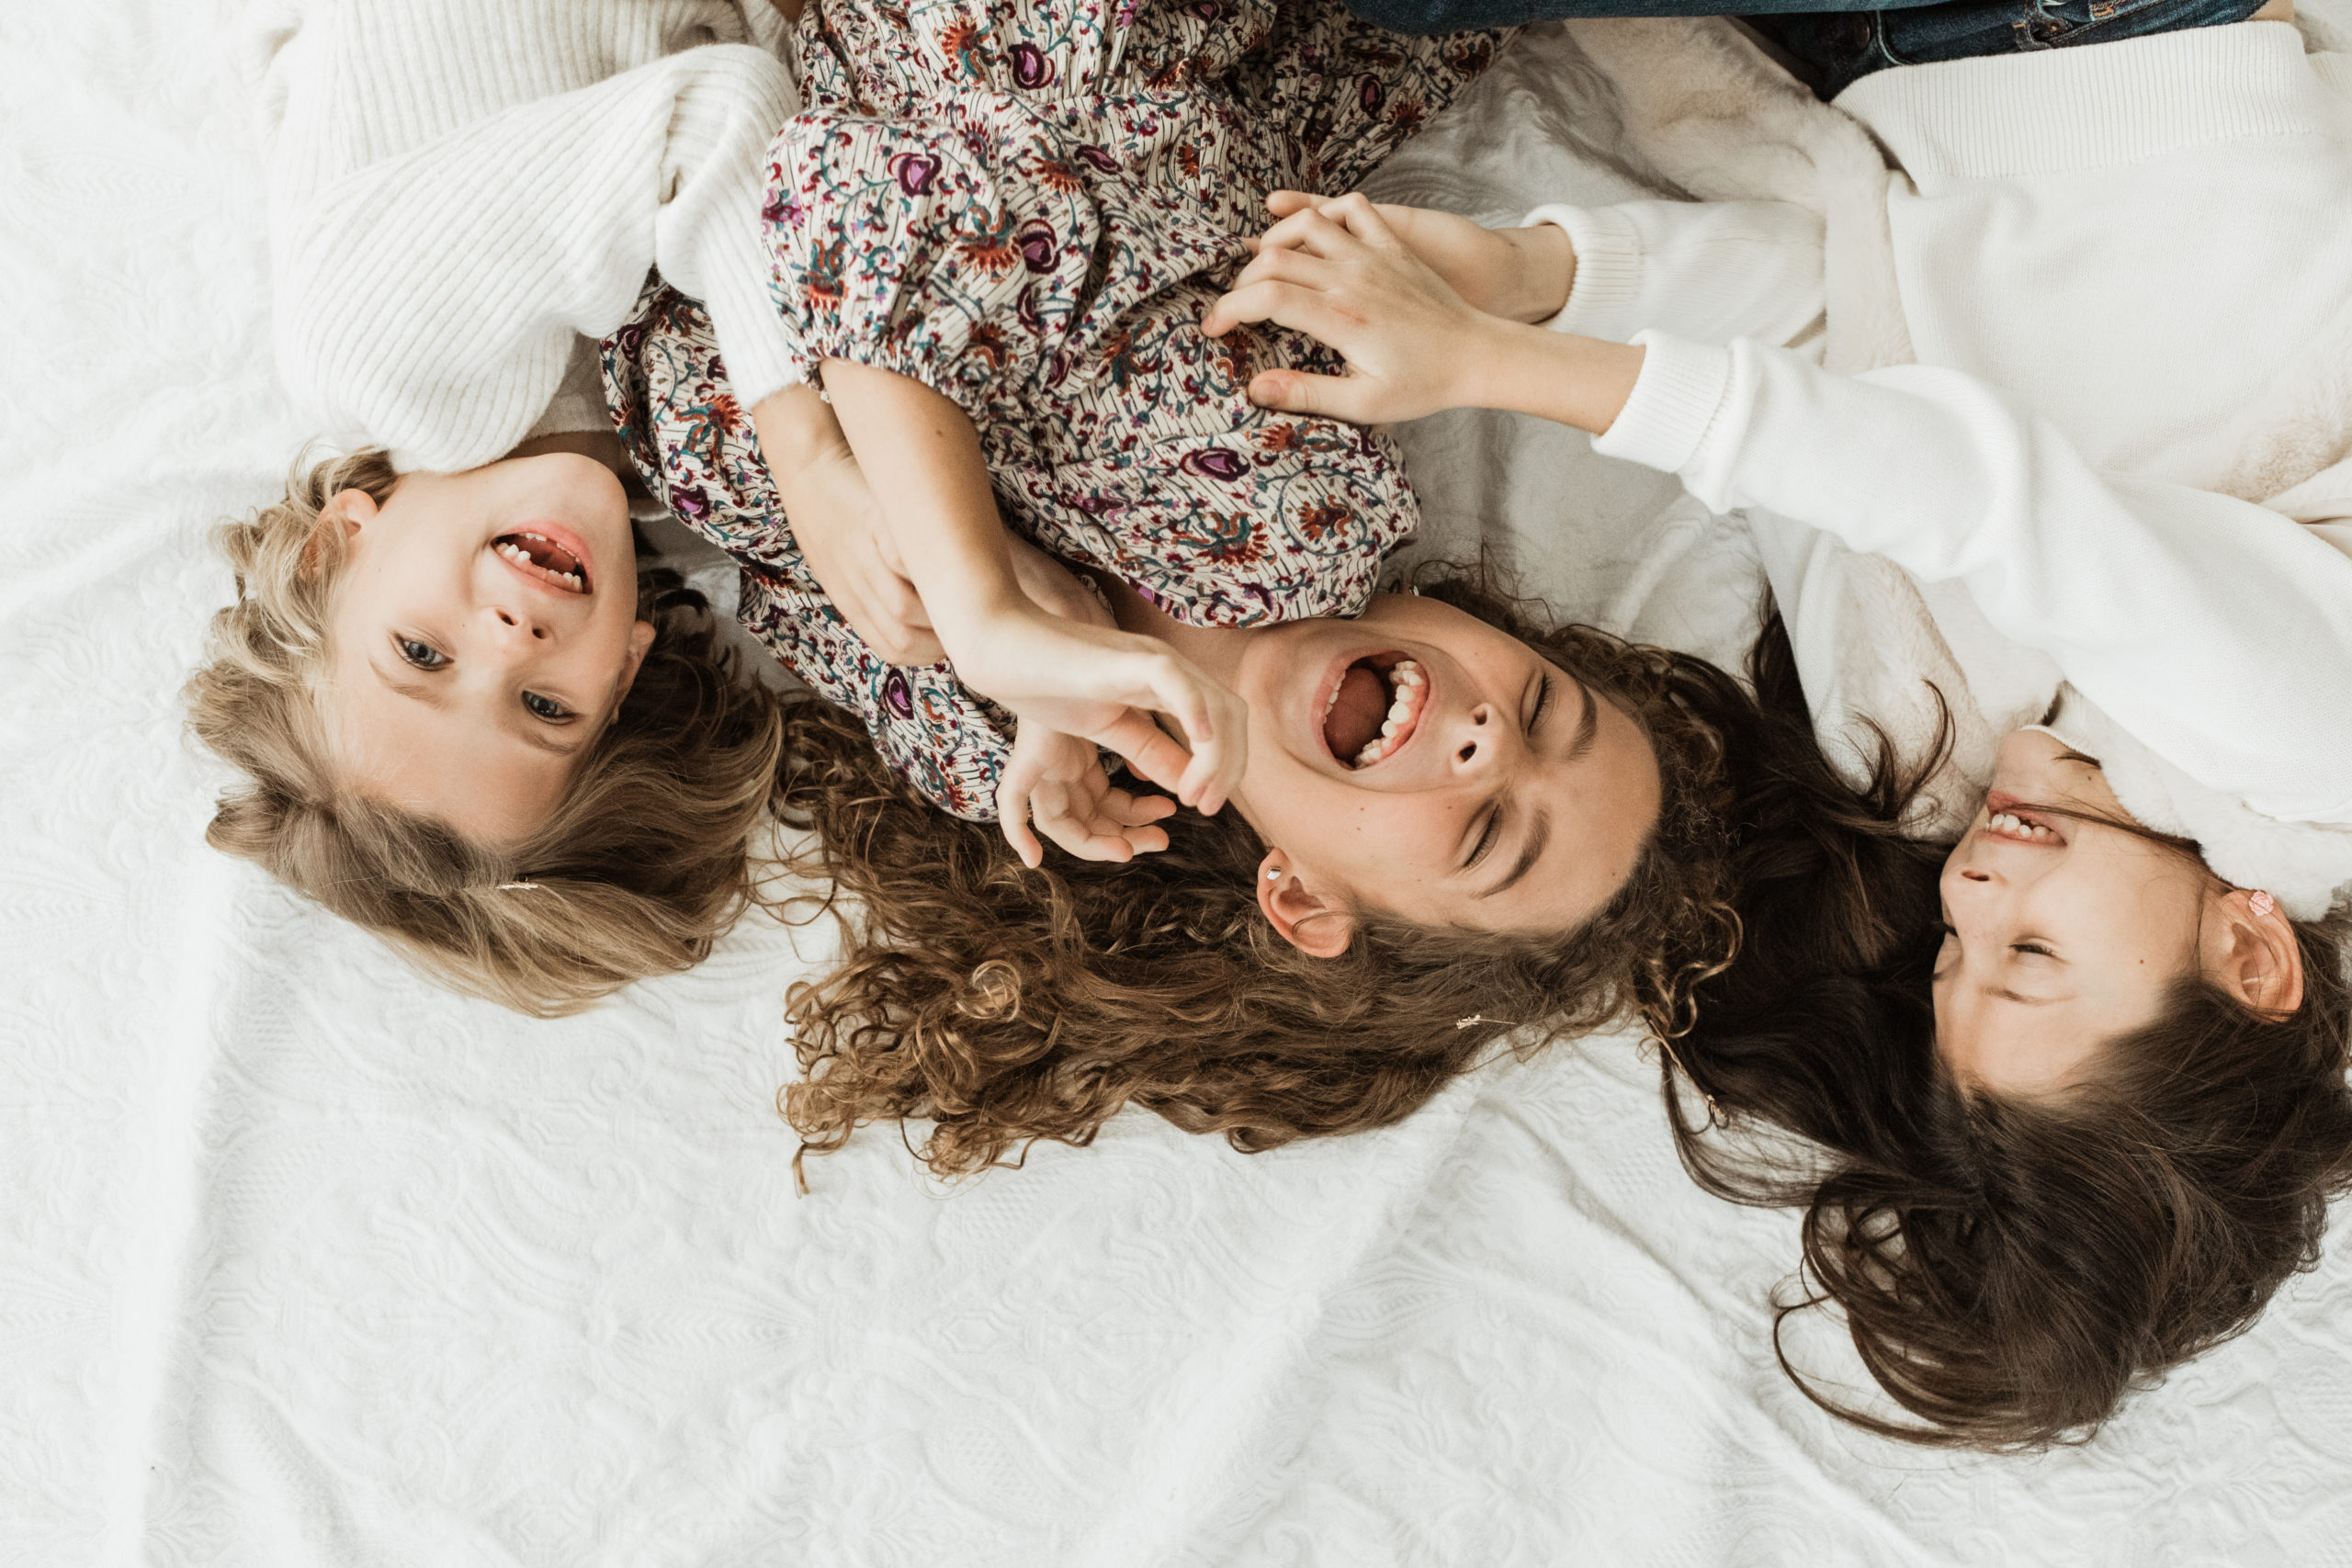 Three young sisters laughing and playing around, laying down on white sheet.